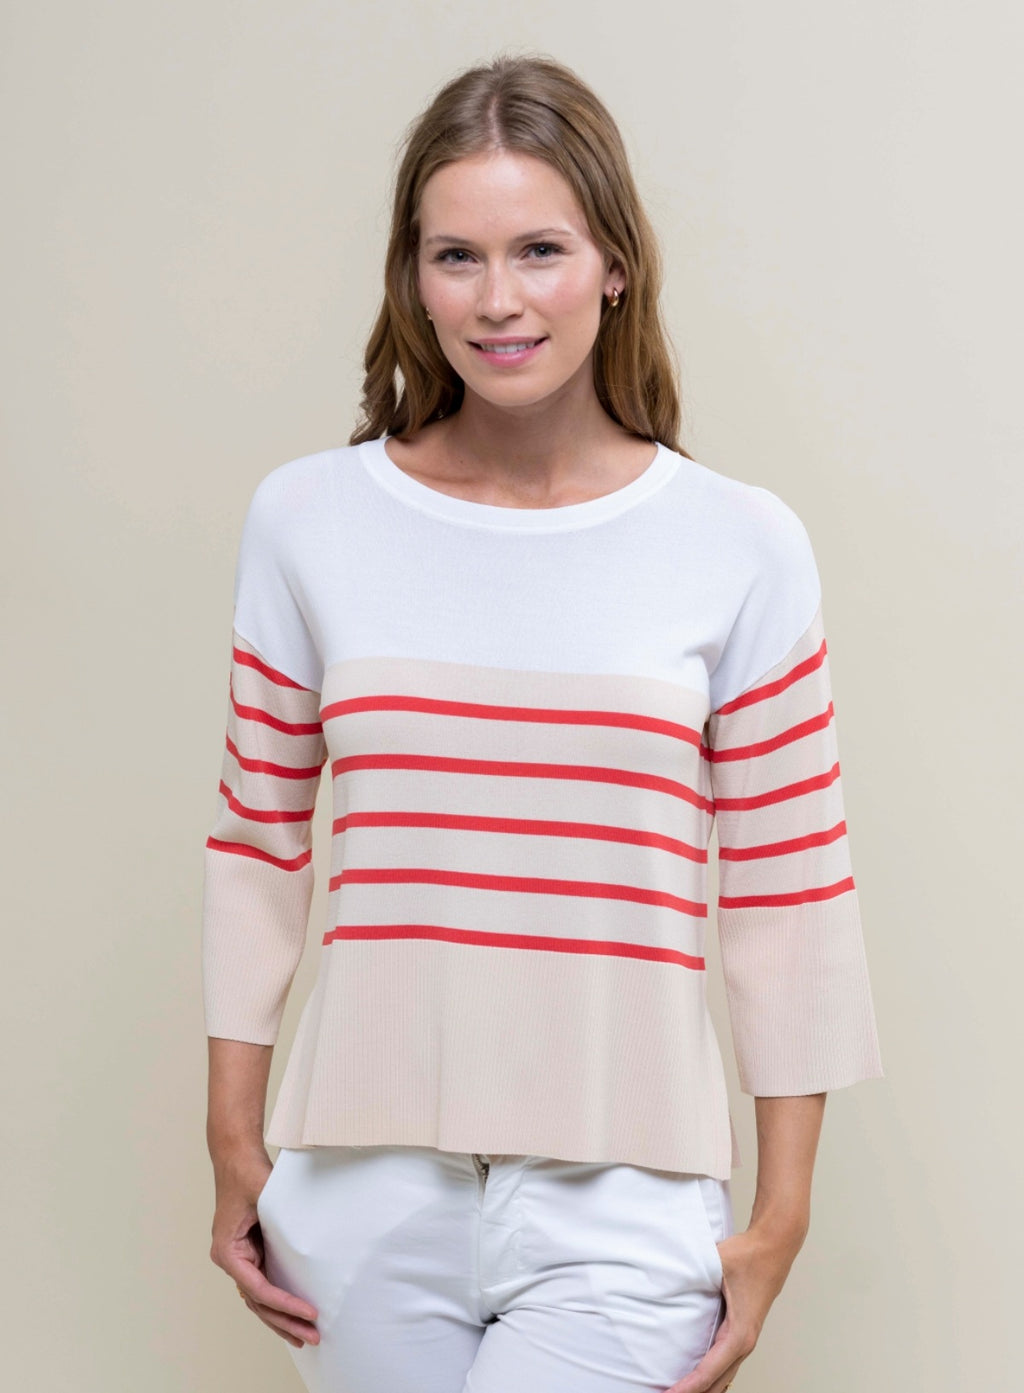 <p>Hongo red horizontal striped light knit top in beige and cream with 3/4 Bell sleeves </p>
<p>Product code JL02H501</p>